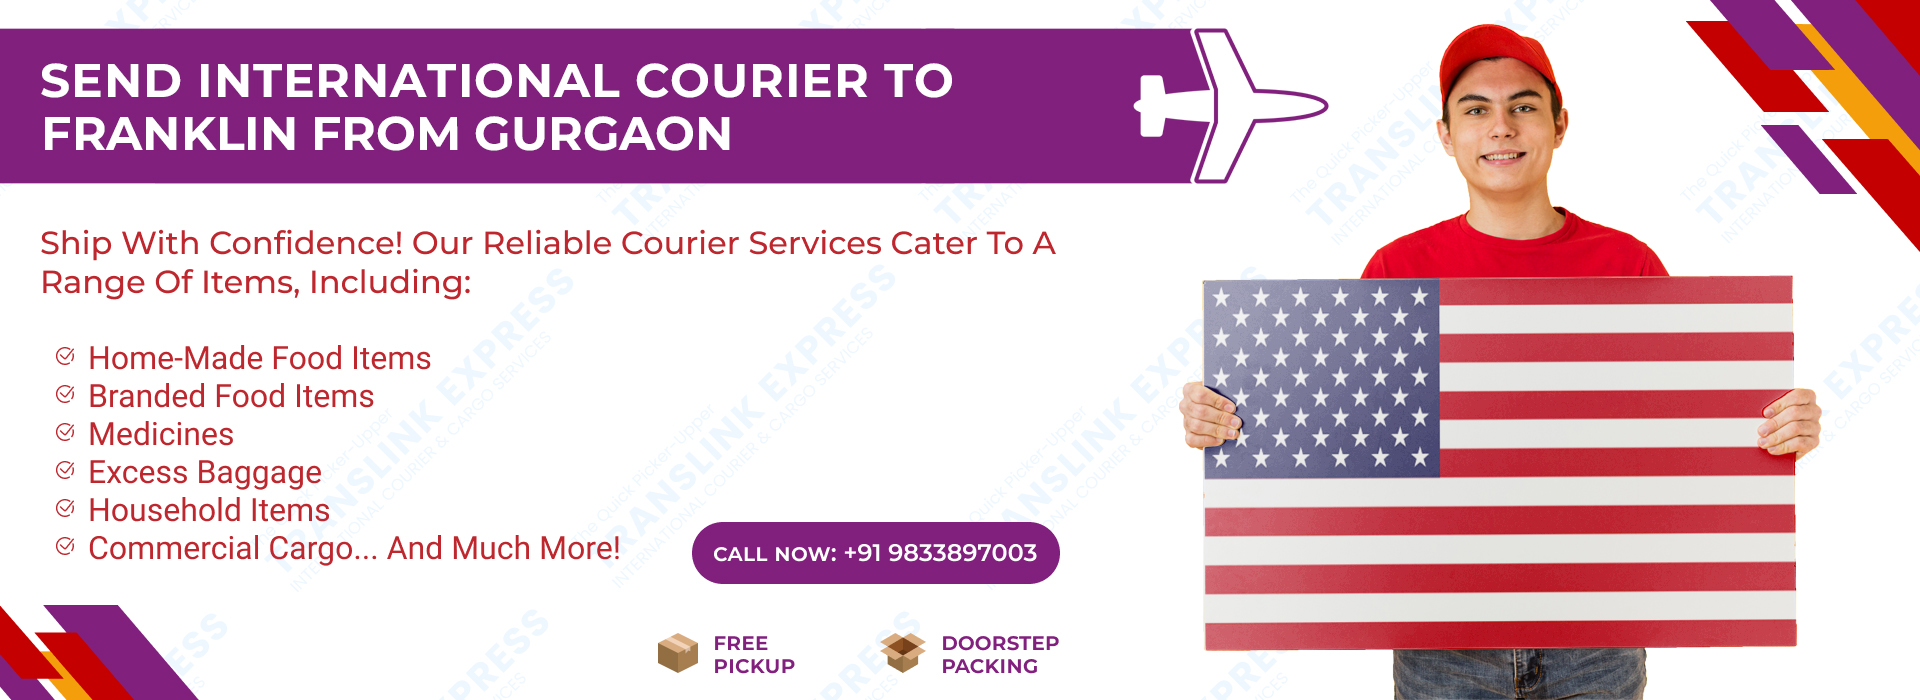 Courier to Franklin From Gurgaon